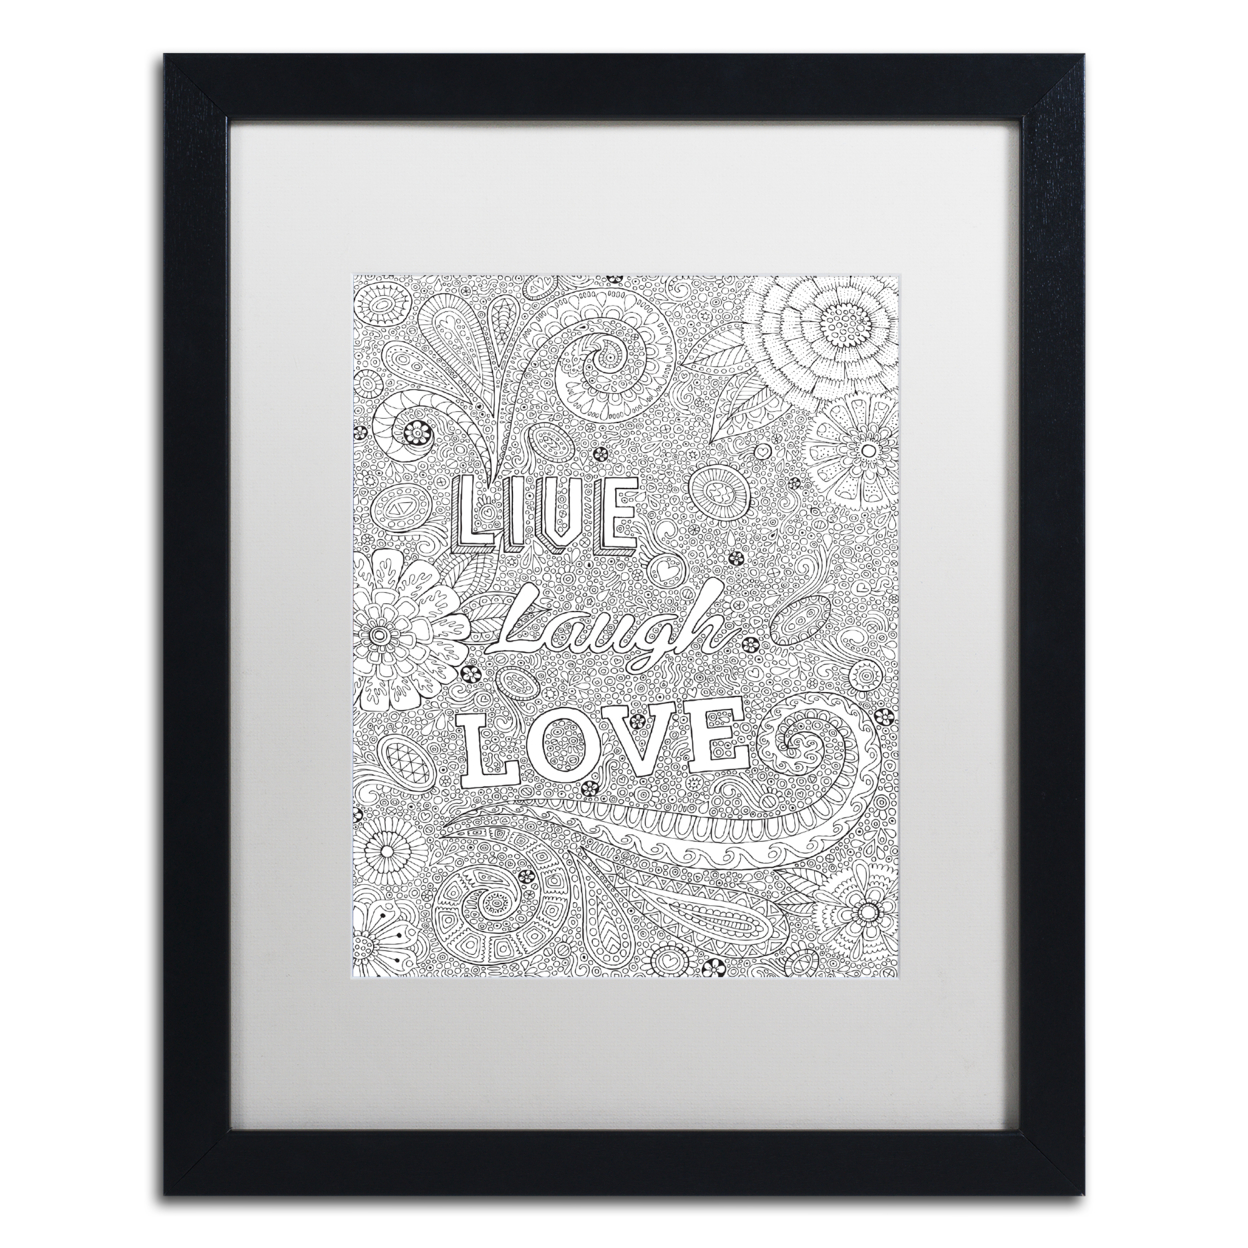 Hello Angel 'Live Laugh Love' Black Wooden Framed Art 18 X 22 Inches